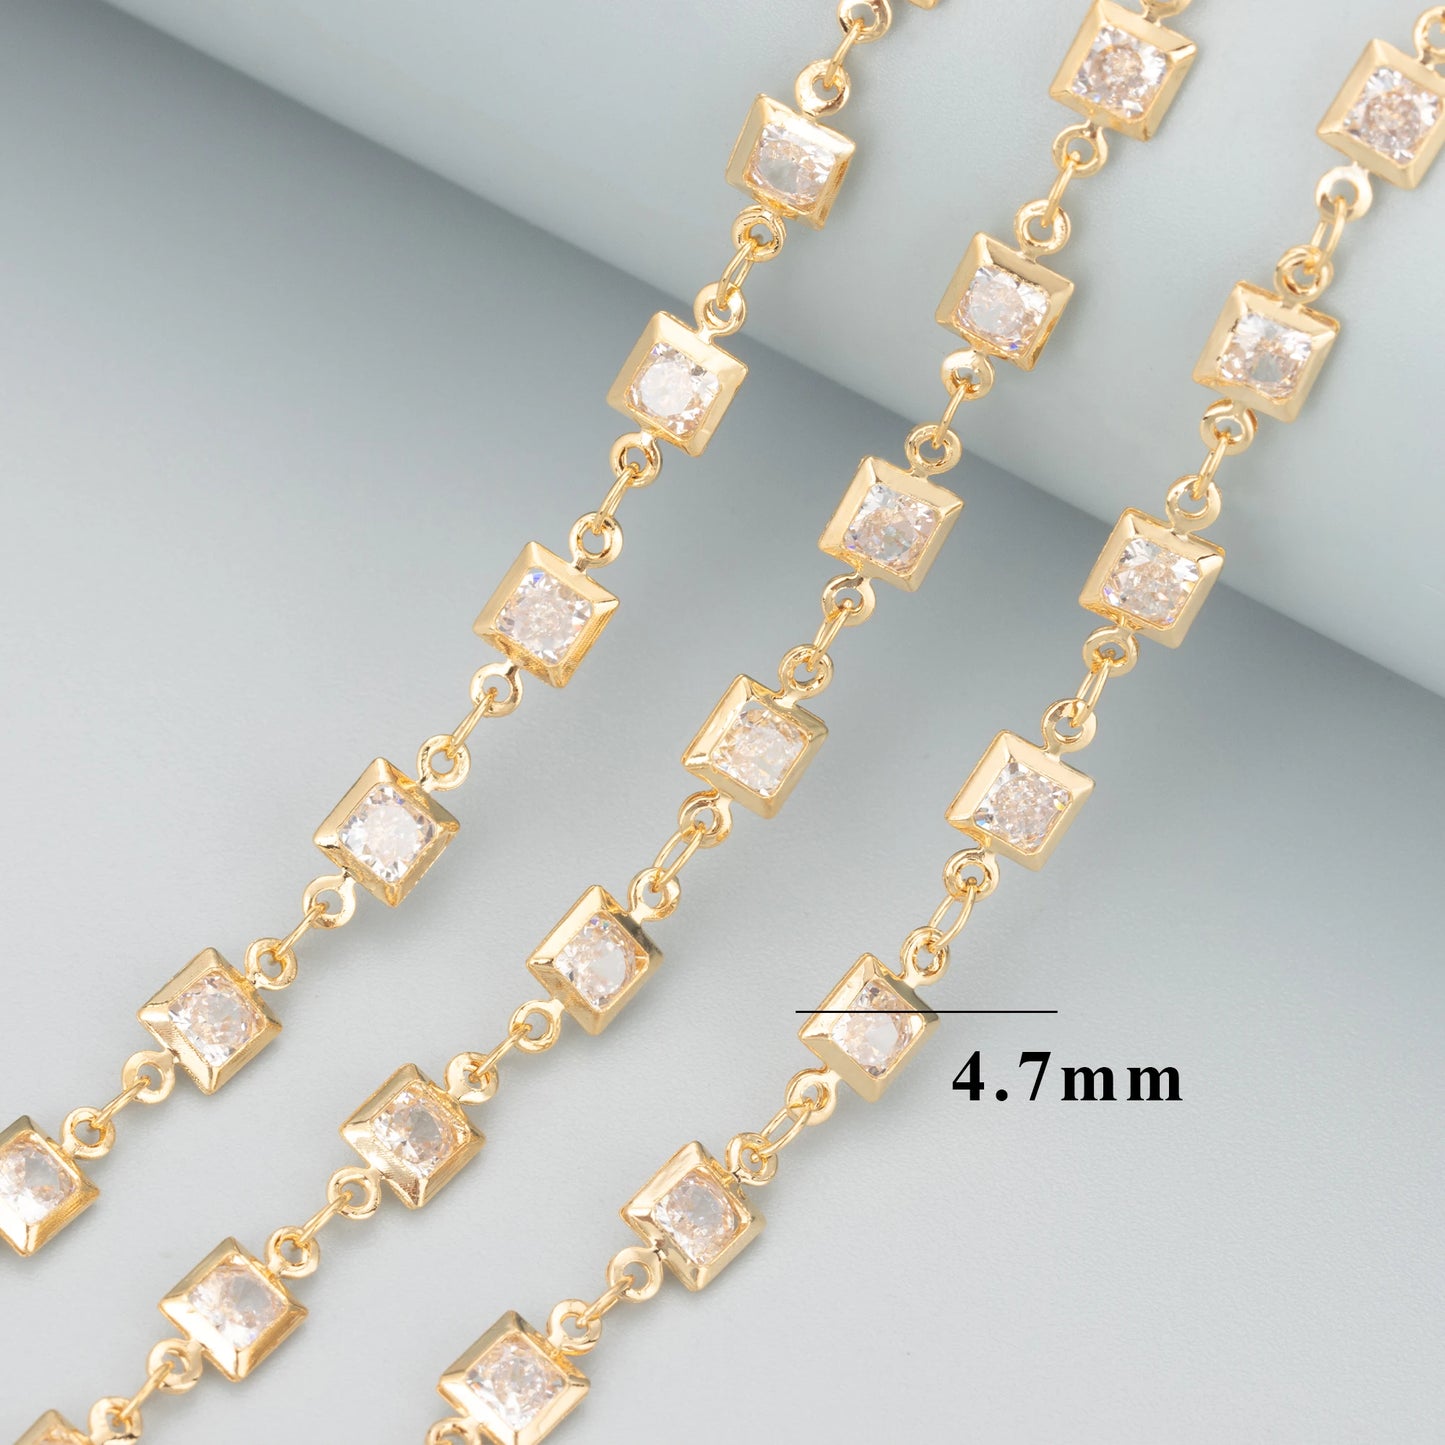 GUFEATHER C160,diy chain,pass REACH,nickel free,18k gold plated,copper metal,zircon,jewelry making,diy bracelet necklace,1m/lot